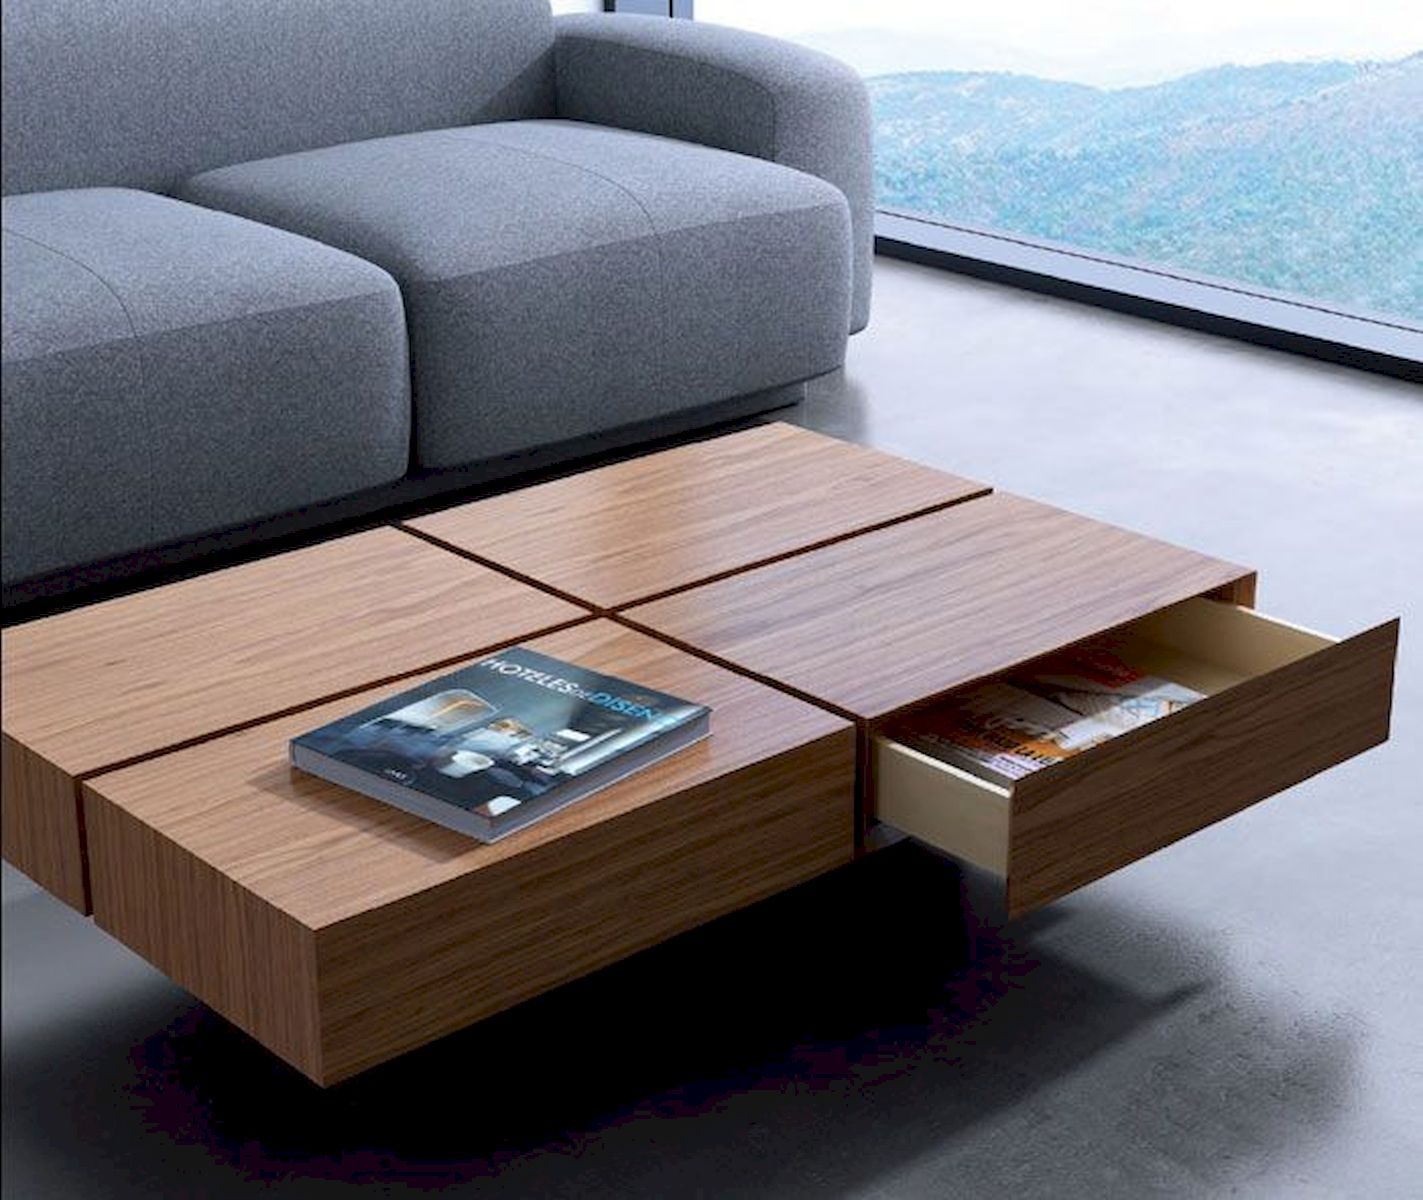 Smart Furniture Design Ideas To Maximize Your Space In 2019 | Engineering Discoveries